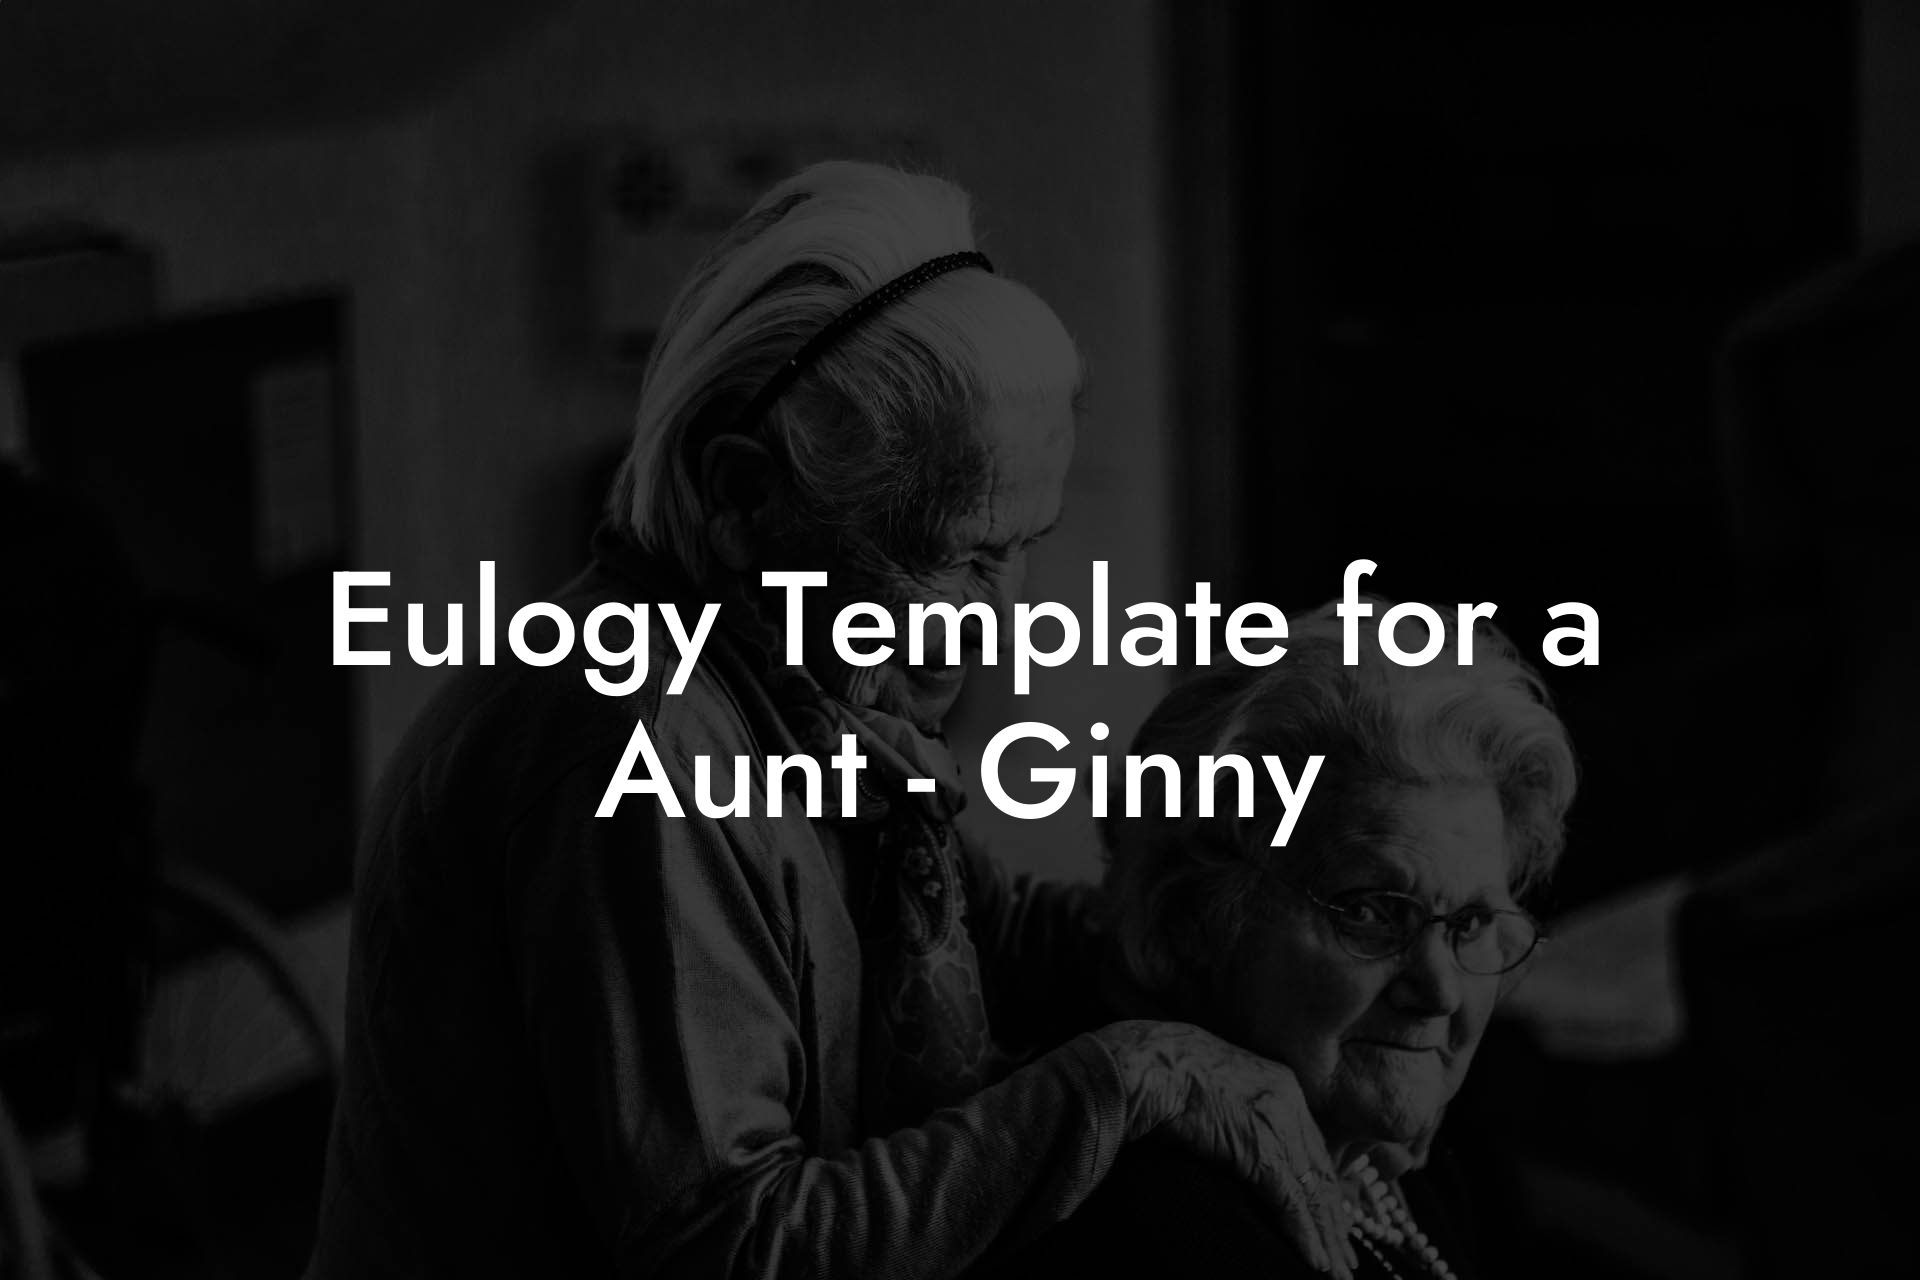 eulogy-template-for-a-aunt-ginny-eulogy-assistant